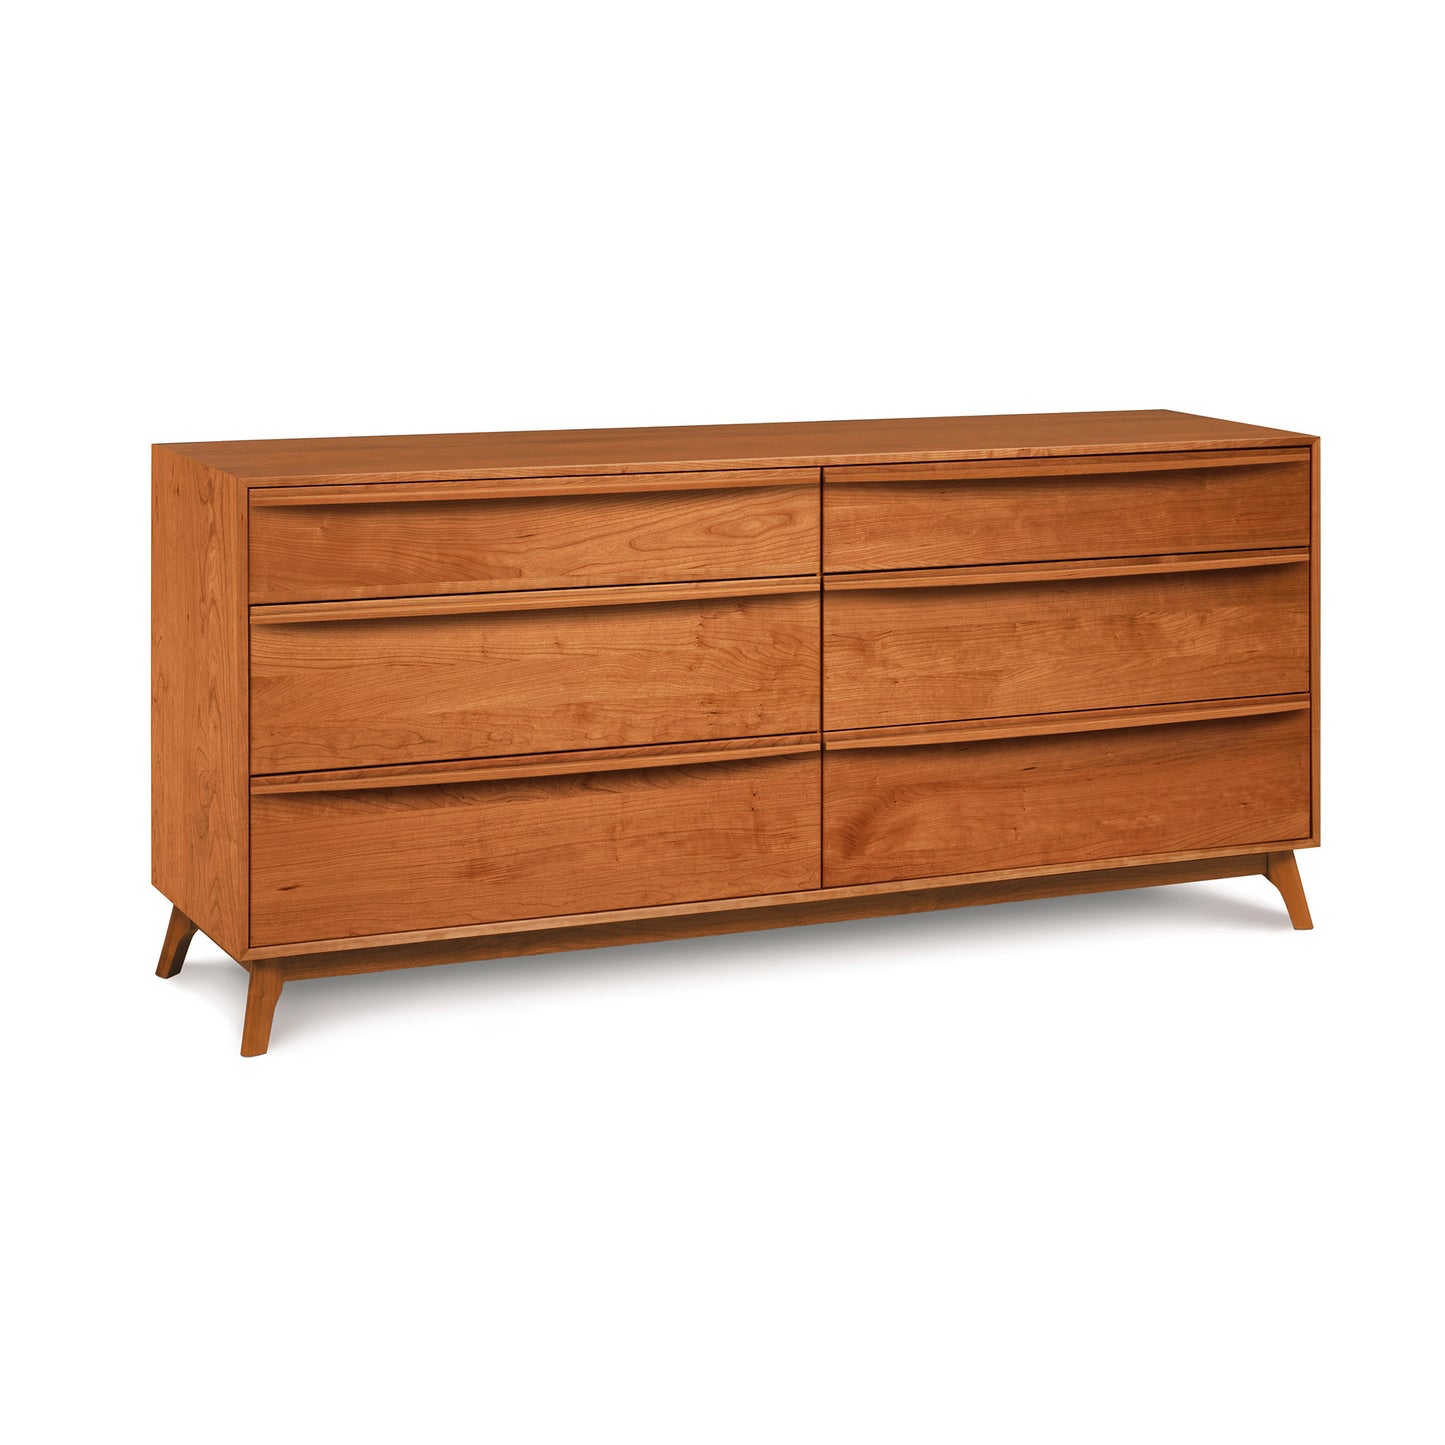 A Vermont crafted, mid-century modern style Copeland Furniture Catalina 6-Drawer Dresser made of solid natural hardwood, isolated on a white background.